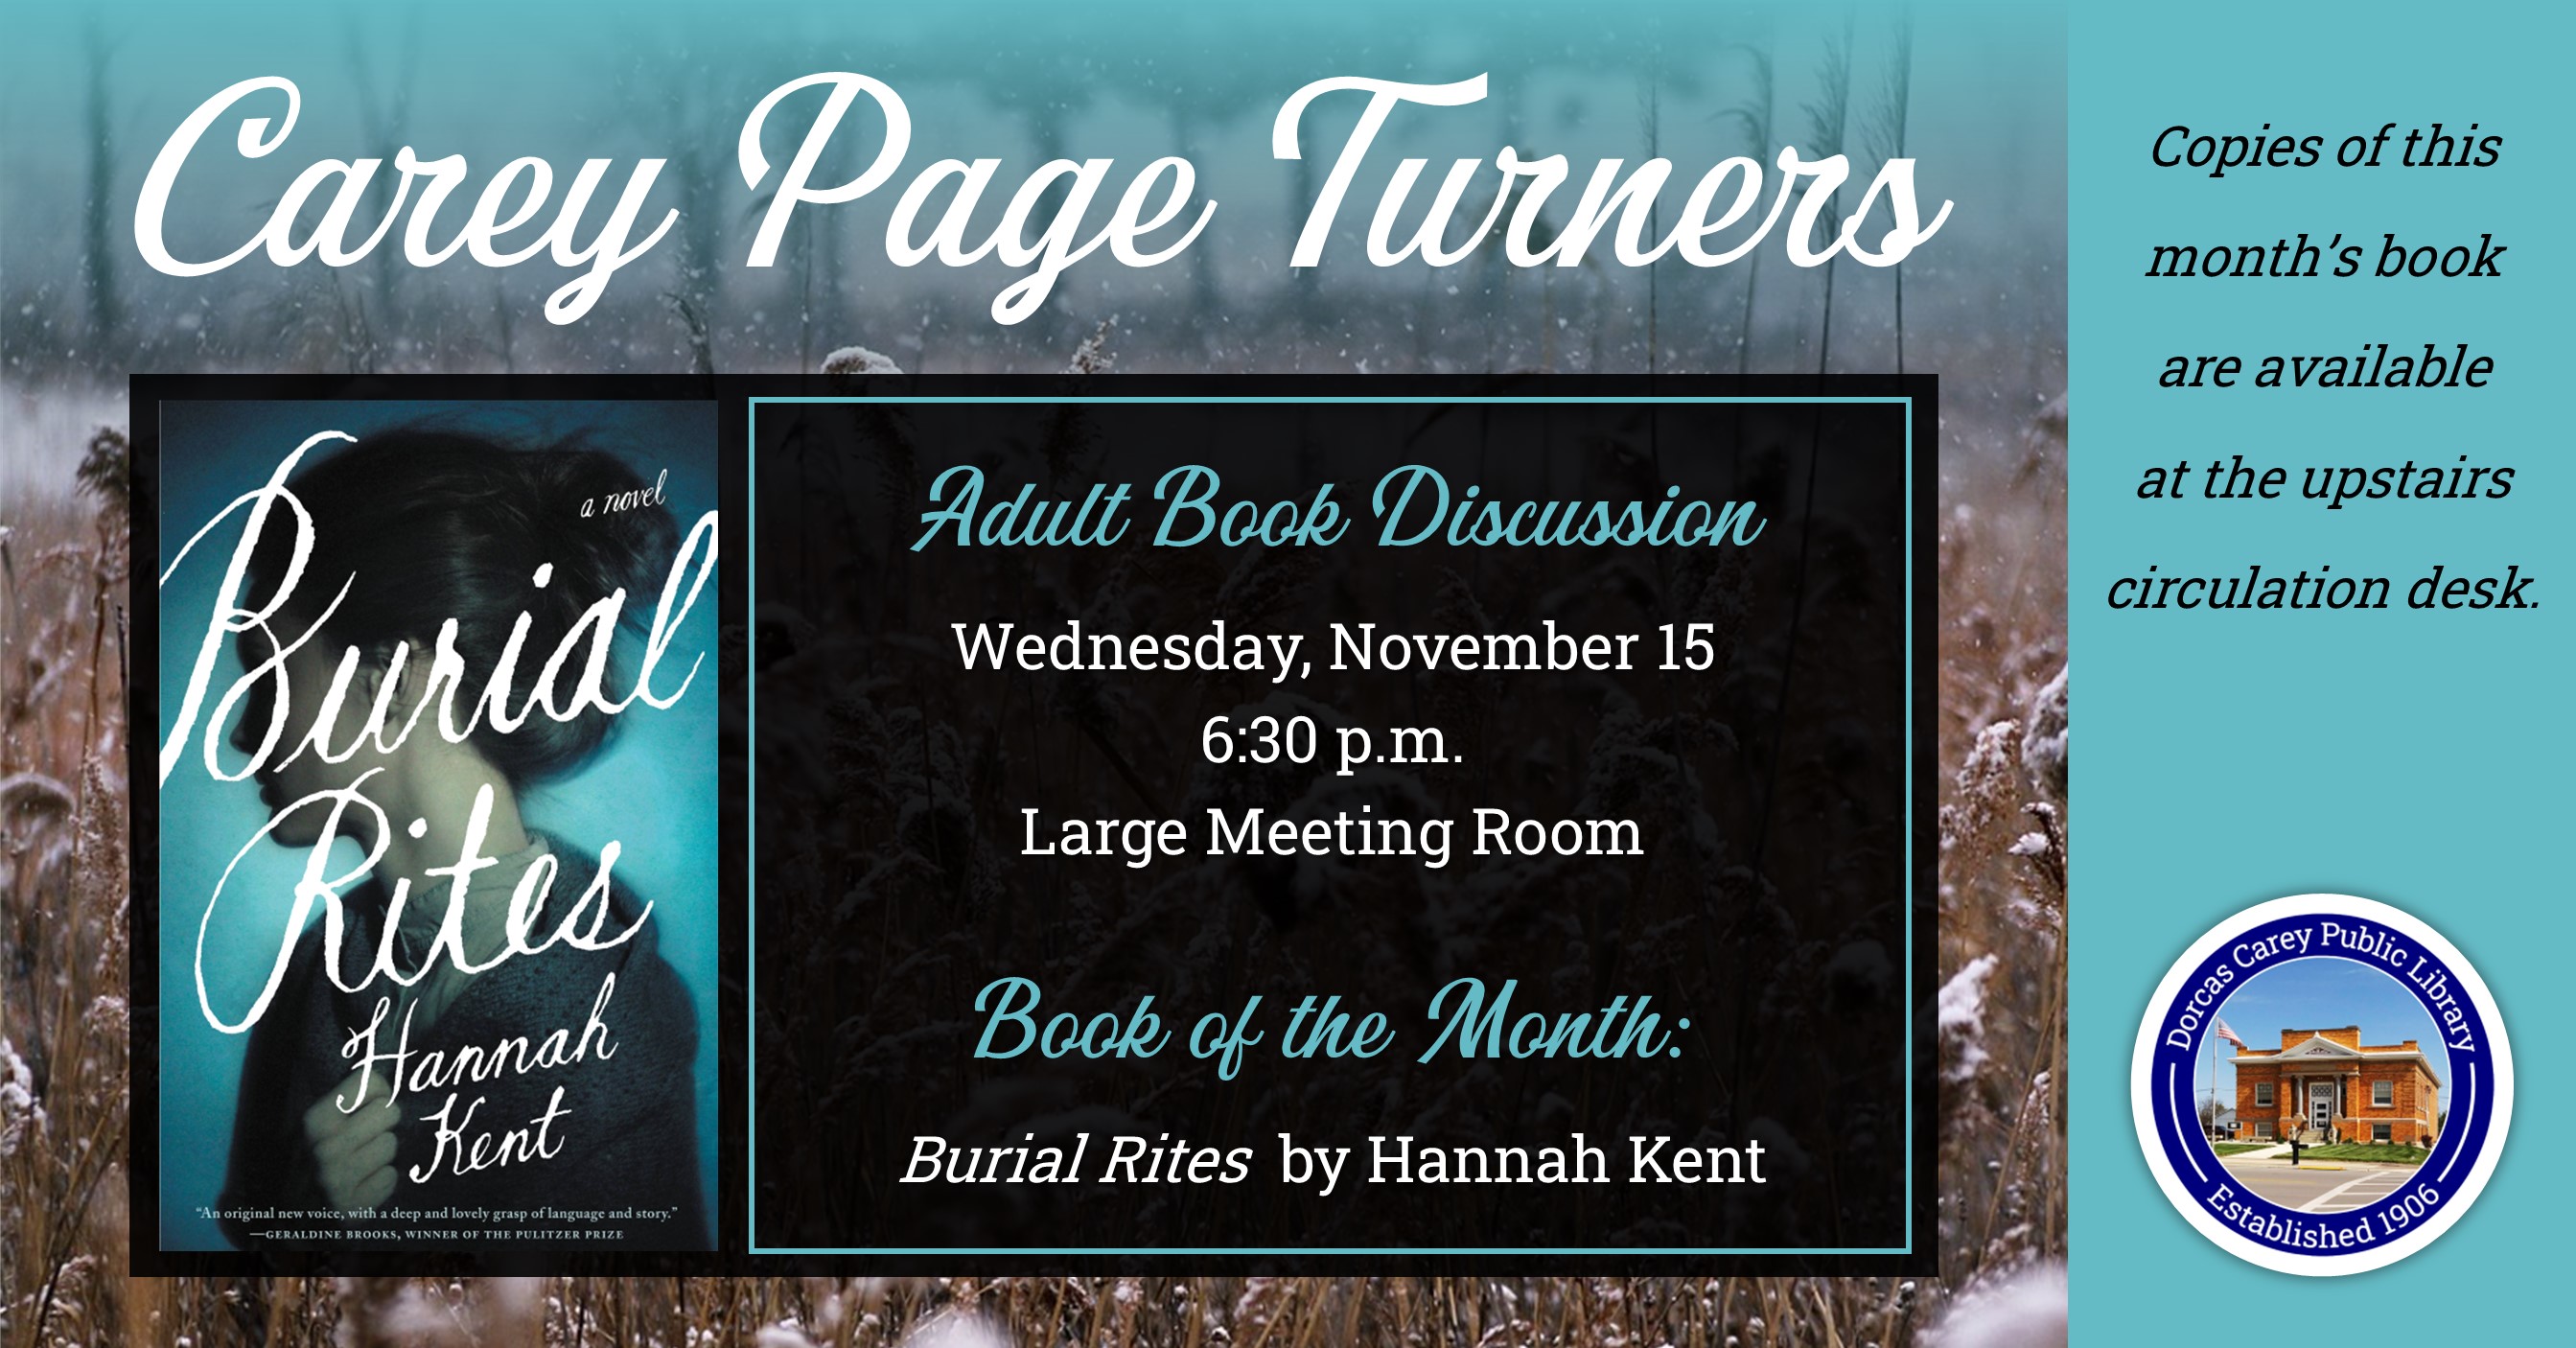 The Carey Page Turners will meet on Wednesday, November 15th at 6:30 p.m. to discuss the book:  Set against Iceland's stark landscape, Hannah Kent brings to vivid life the story of Agnes, who, charged with the brutal murder of her former master, is sent to an isolated farm to await execution.  Horrified at the prospect of housing a convicted murderer, the family at first avoids Agnes. Only Tv=ti, a priest Agnes has mysteriously chosen to be her spiritual guardian, seeks to understand her. But as Agnes's dea